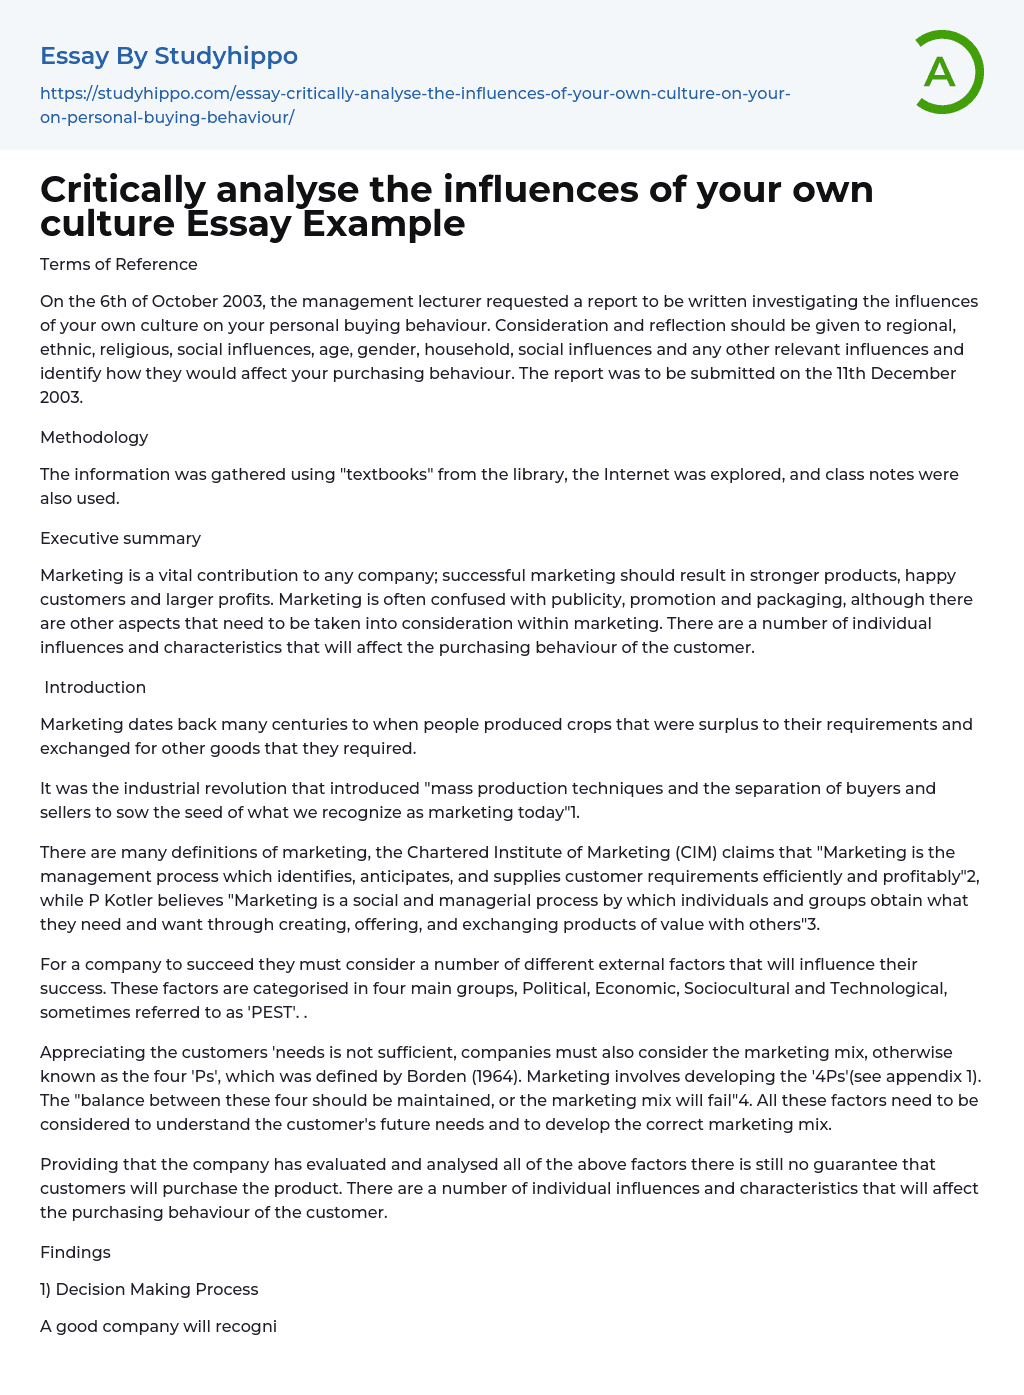 essay on topic influence